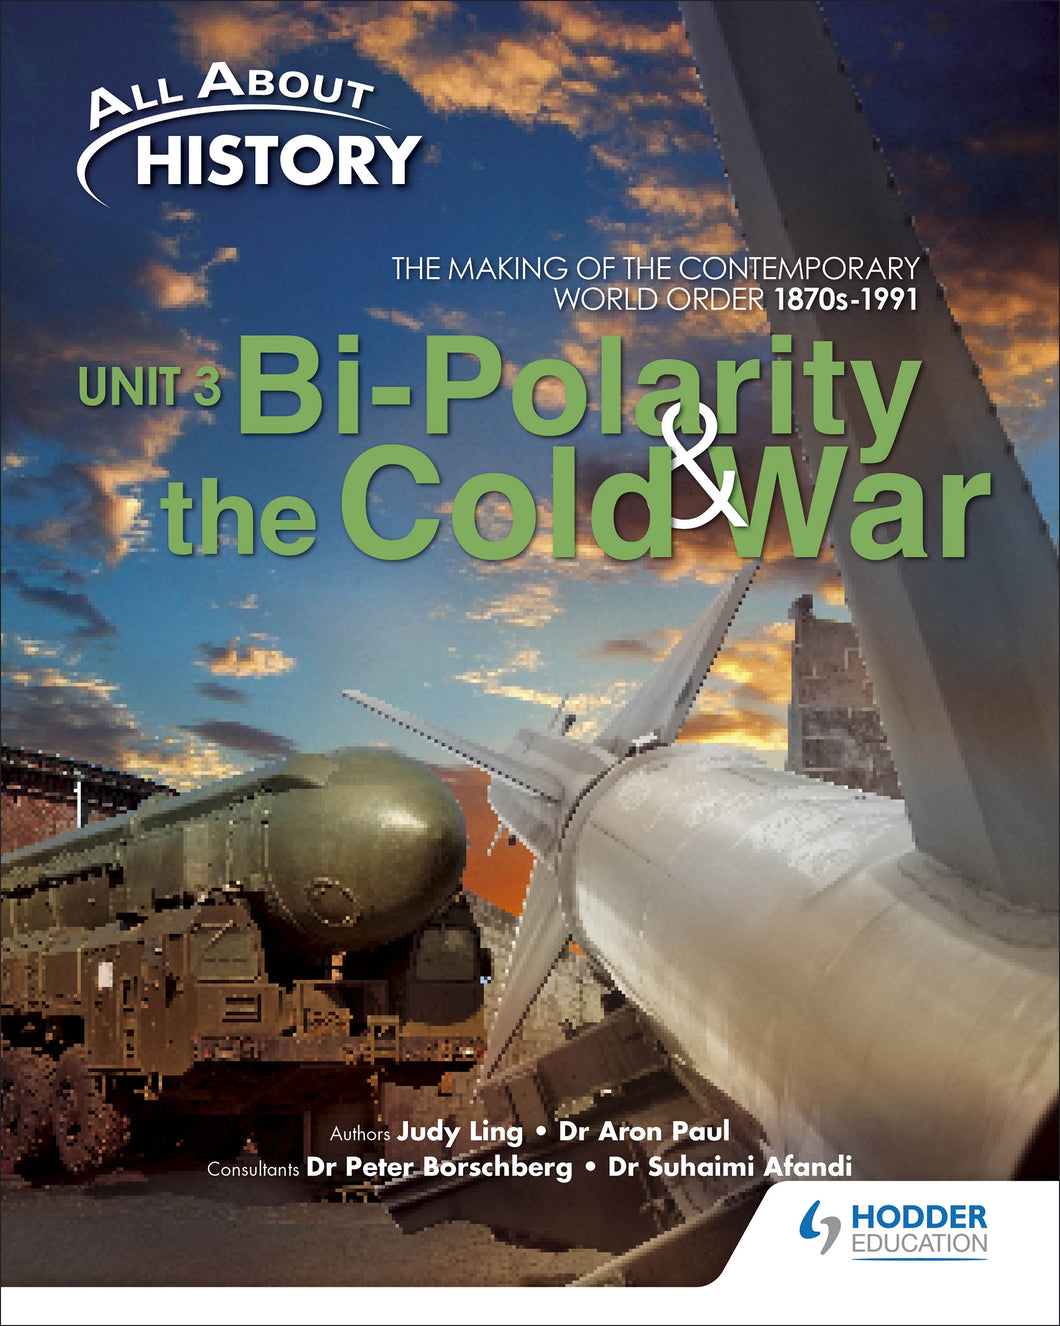 KRSS - History Elective - All About History Unit 3 - Bi-Polarity & The Cold War